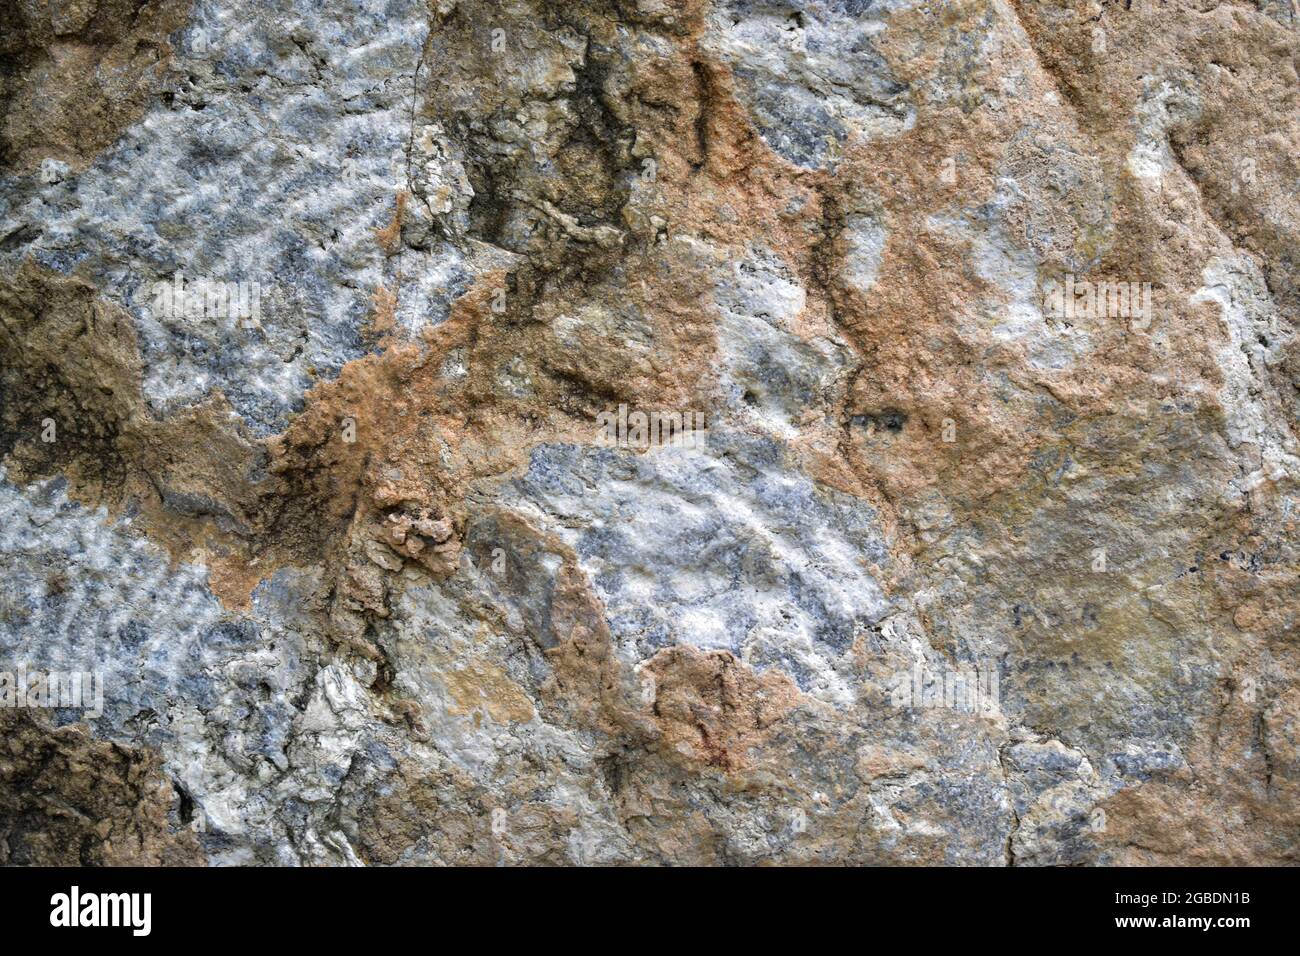 Texture of rock, Rock Surface Foto Stock